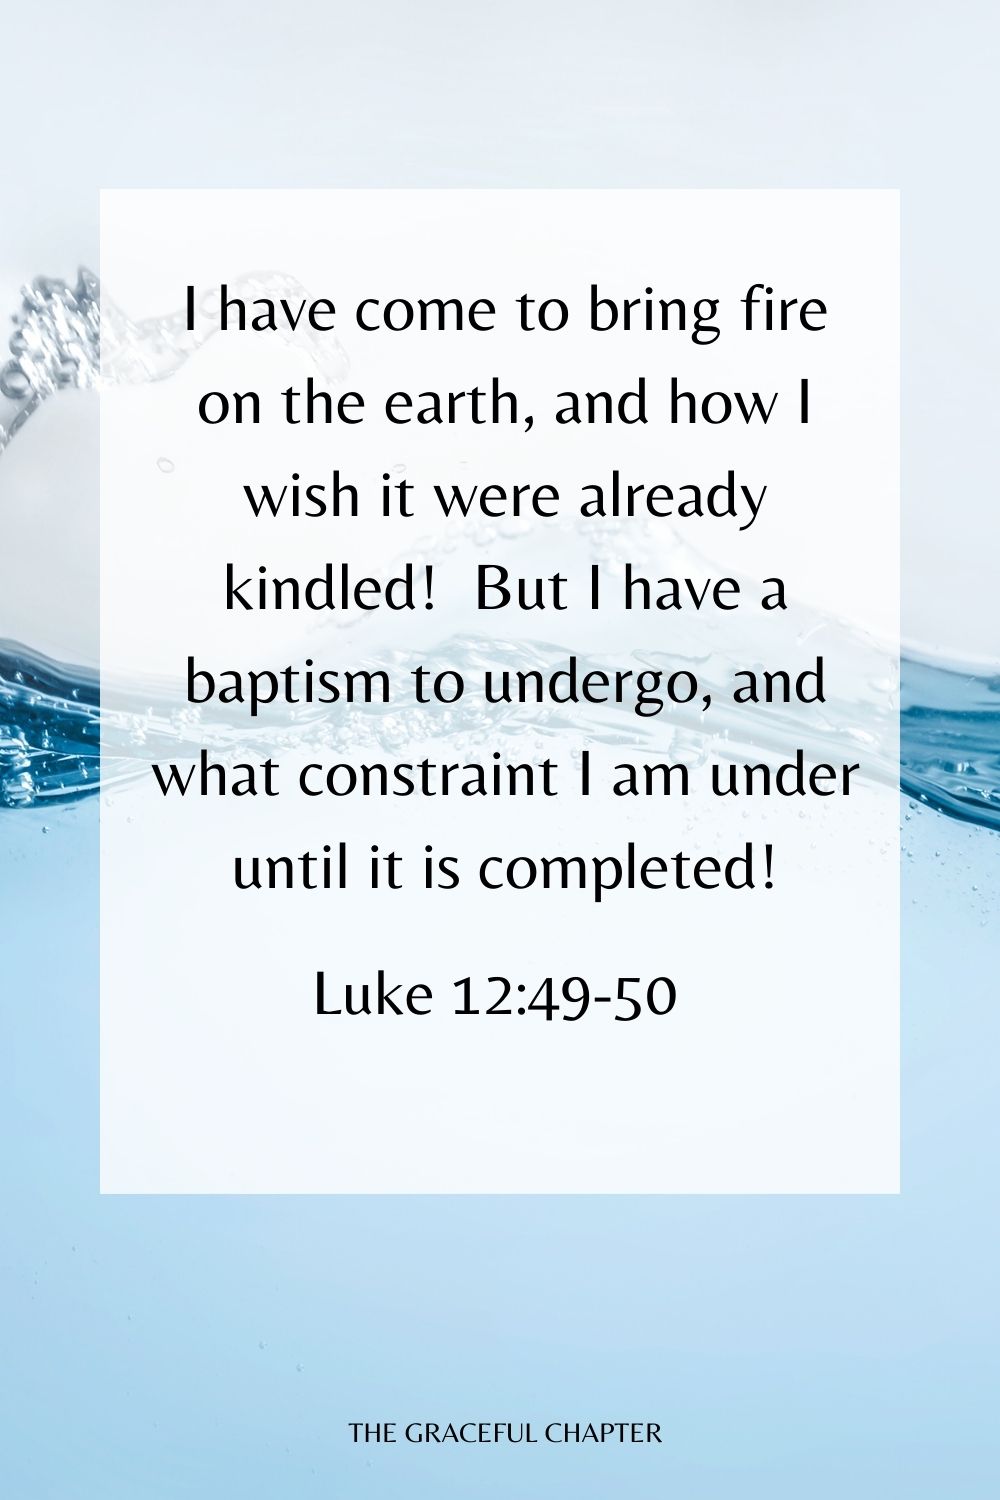 I have come to bring fire on the earth, and how I wish it were already kindled!  But I have a baptism to undergo, and what constraint I am under until it is completed! Luke 12:49-50